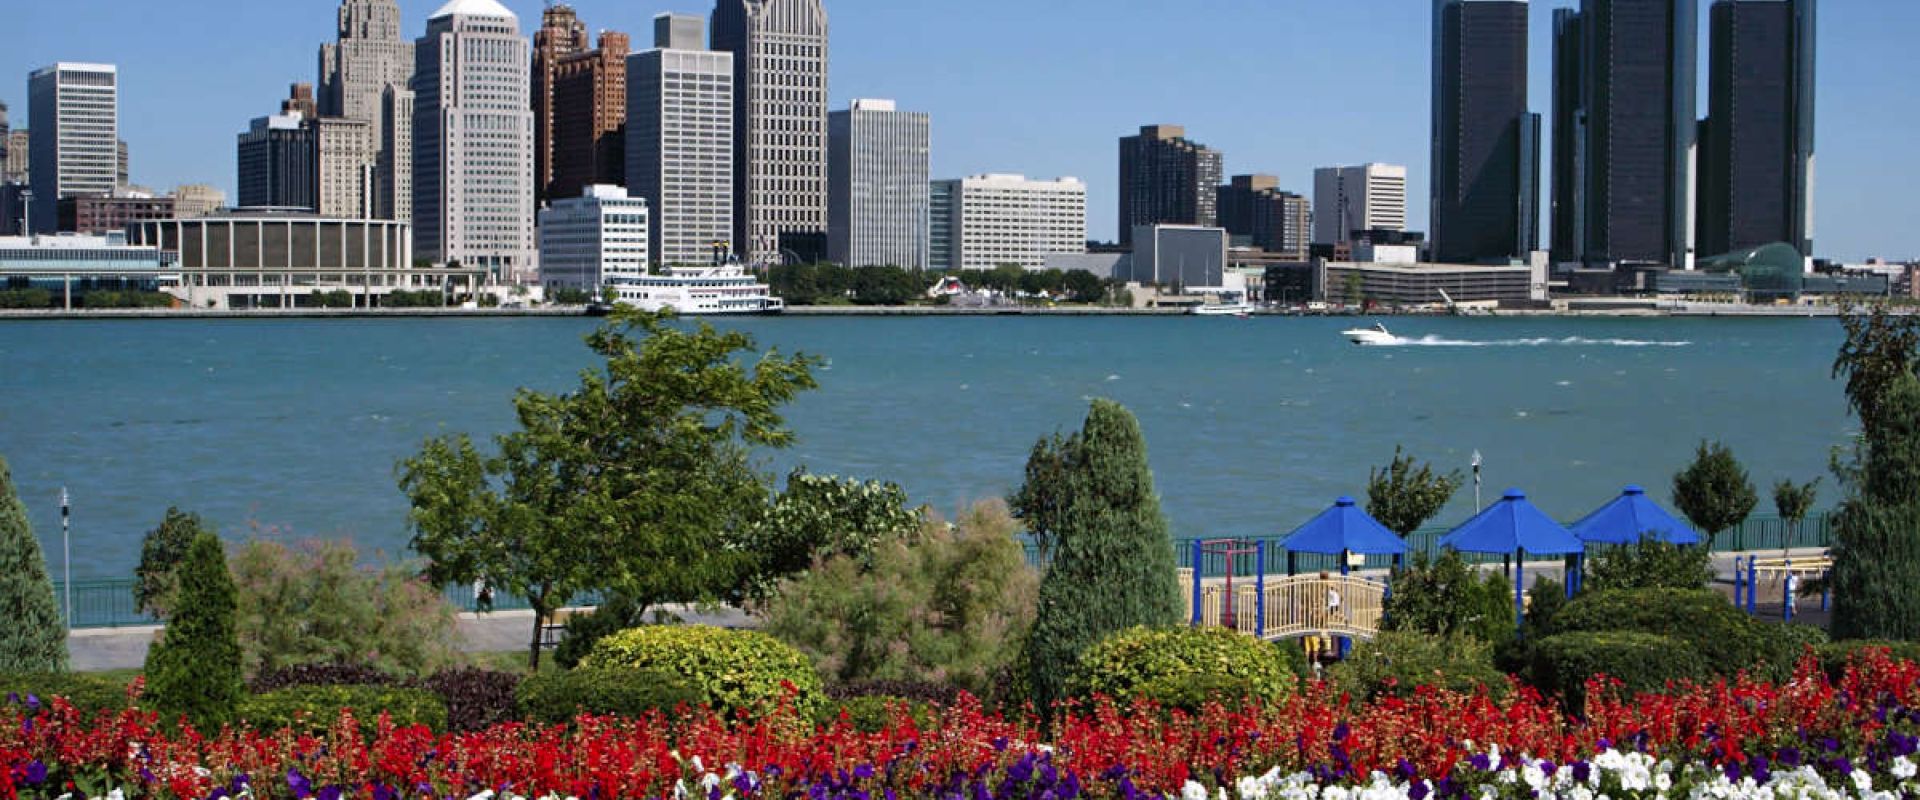 A bed of flowers and a playground nearby the Detroit River on a sunny day. Across the river is an urban landscape that features a collection of skyscrapers.